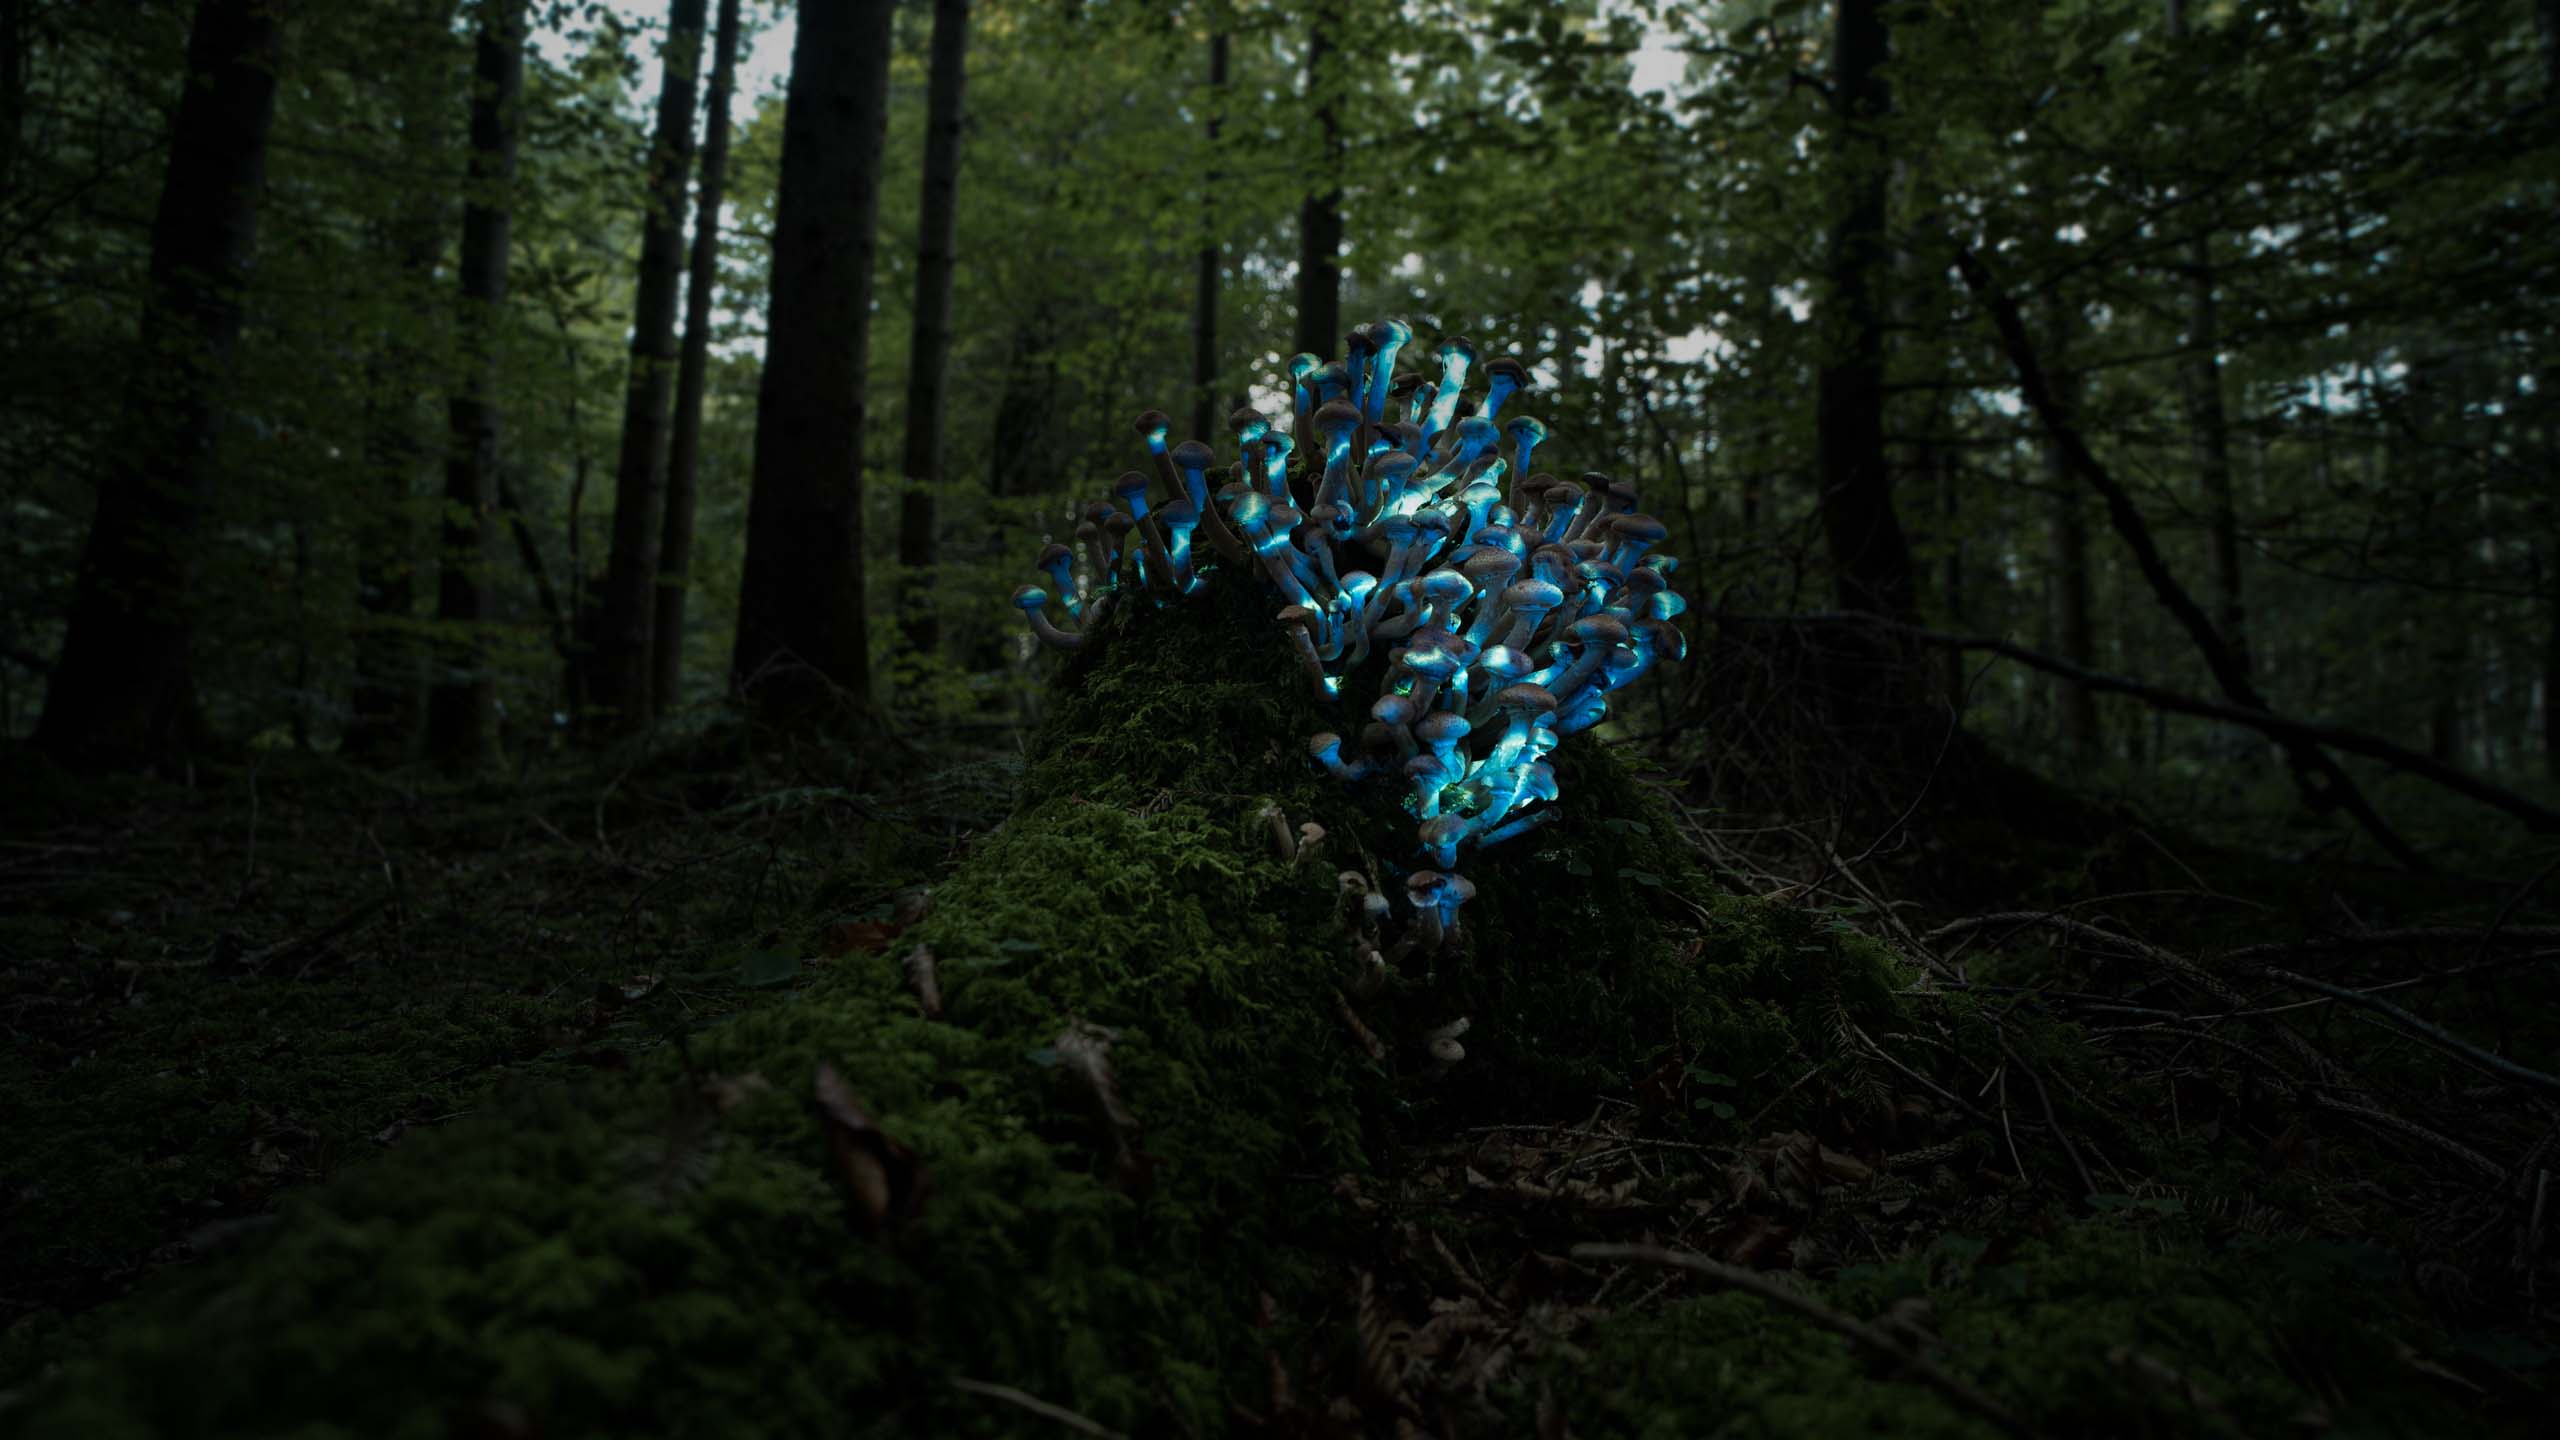 Video projection on a group of Mushrooms. Blue geometric visuals